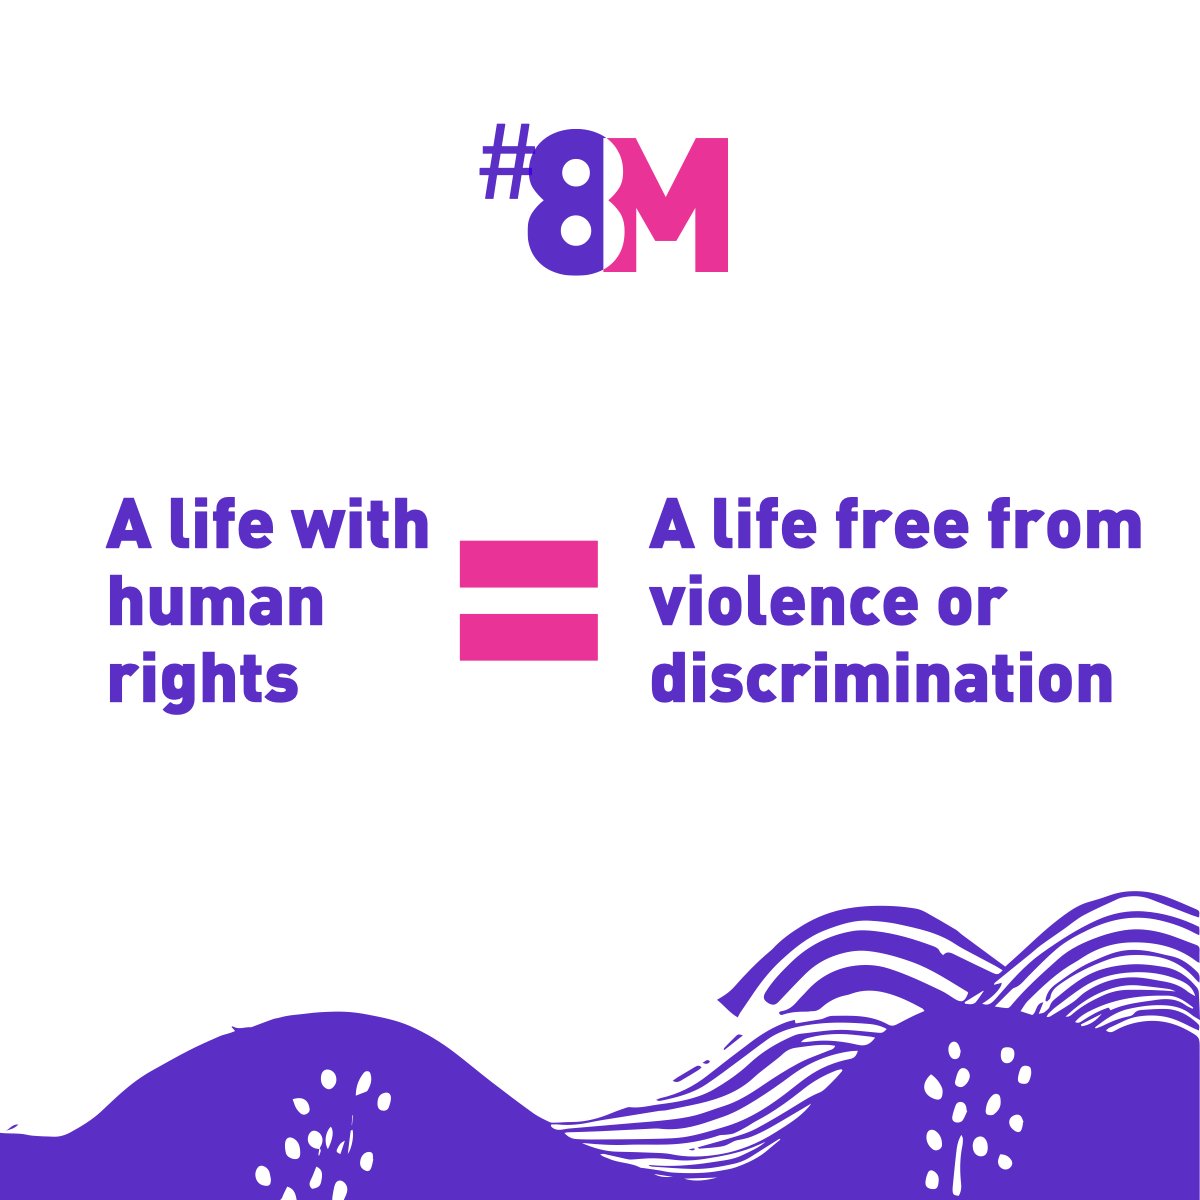 The #IACHR will continue to work until all girls, adolescents, and women in the region can enjoy their #HumanRights. #8M #WomensRights 👉🏿 bit.ly/49yzll6